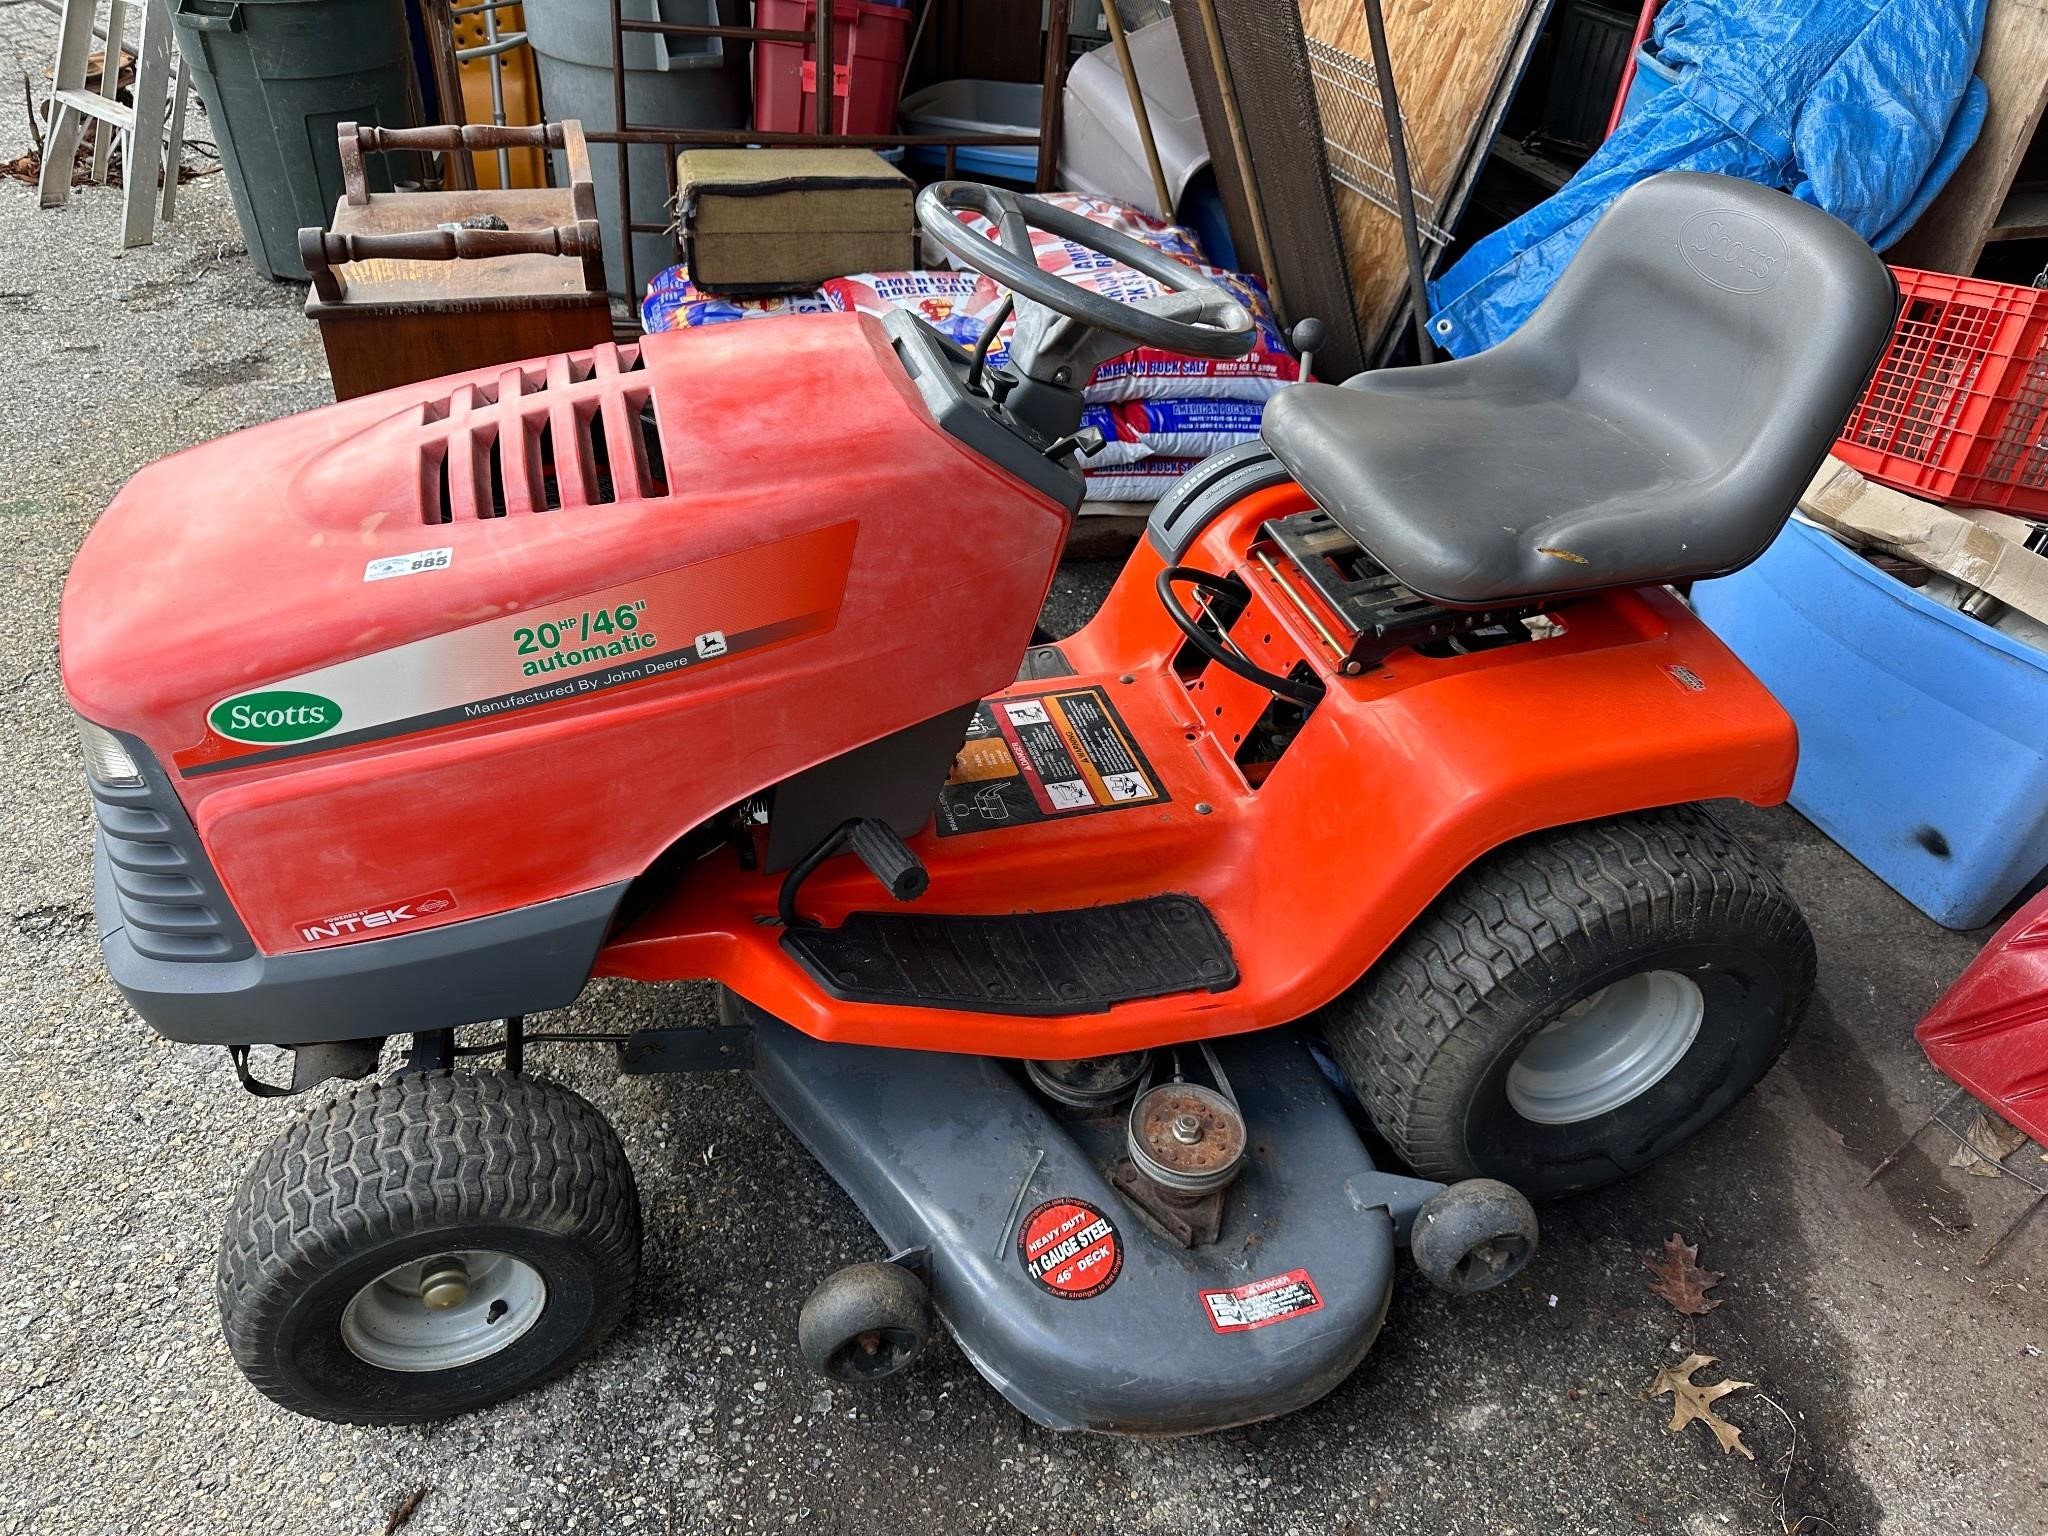 Scotts 46" Lawn Mower - As Is - Does Not Run